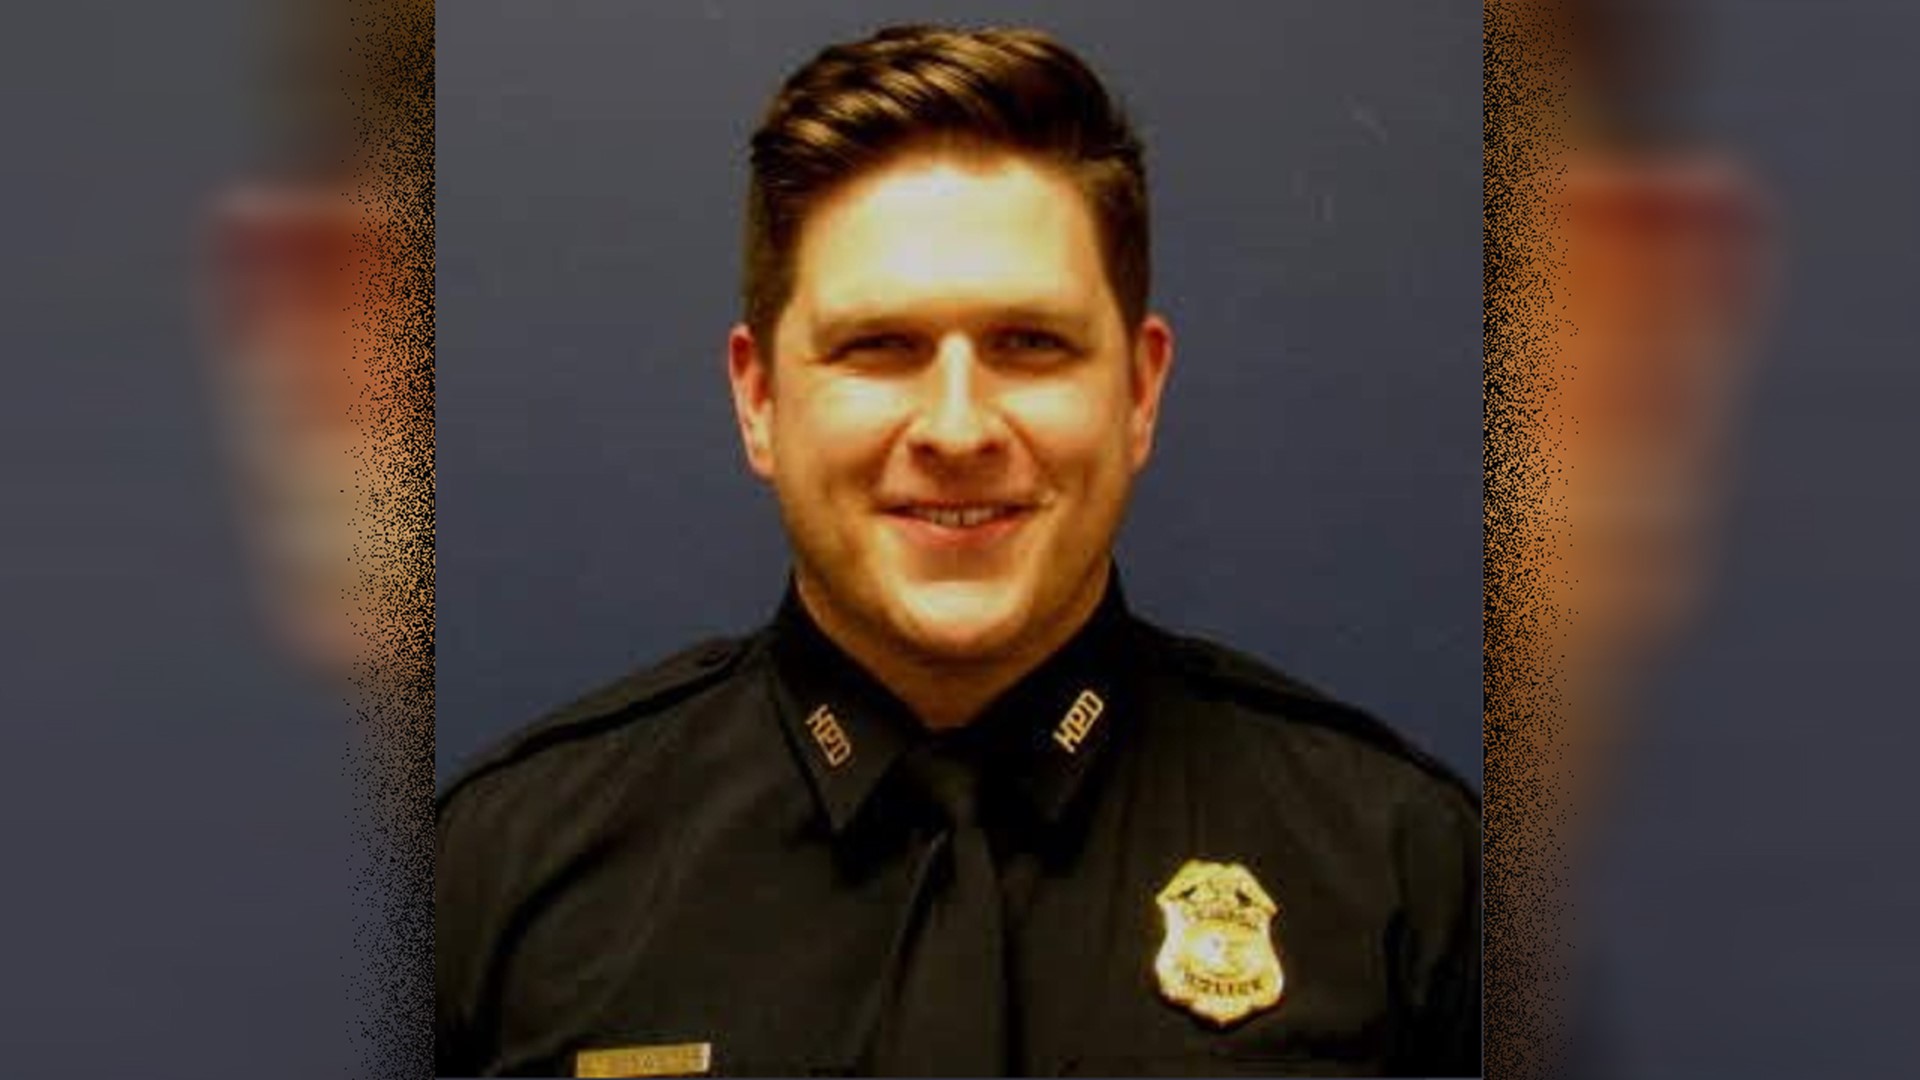 Sergeant Chris Brewster was shot to death by Arturo Solis on Saturday.